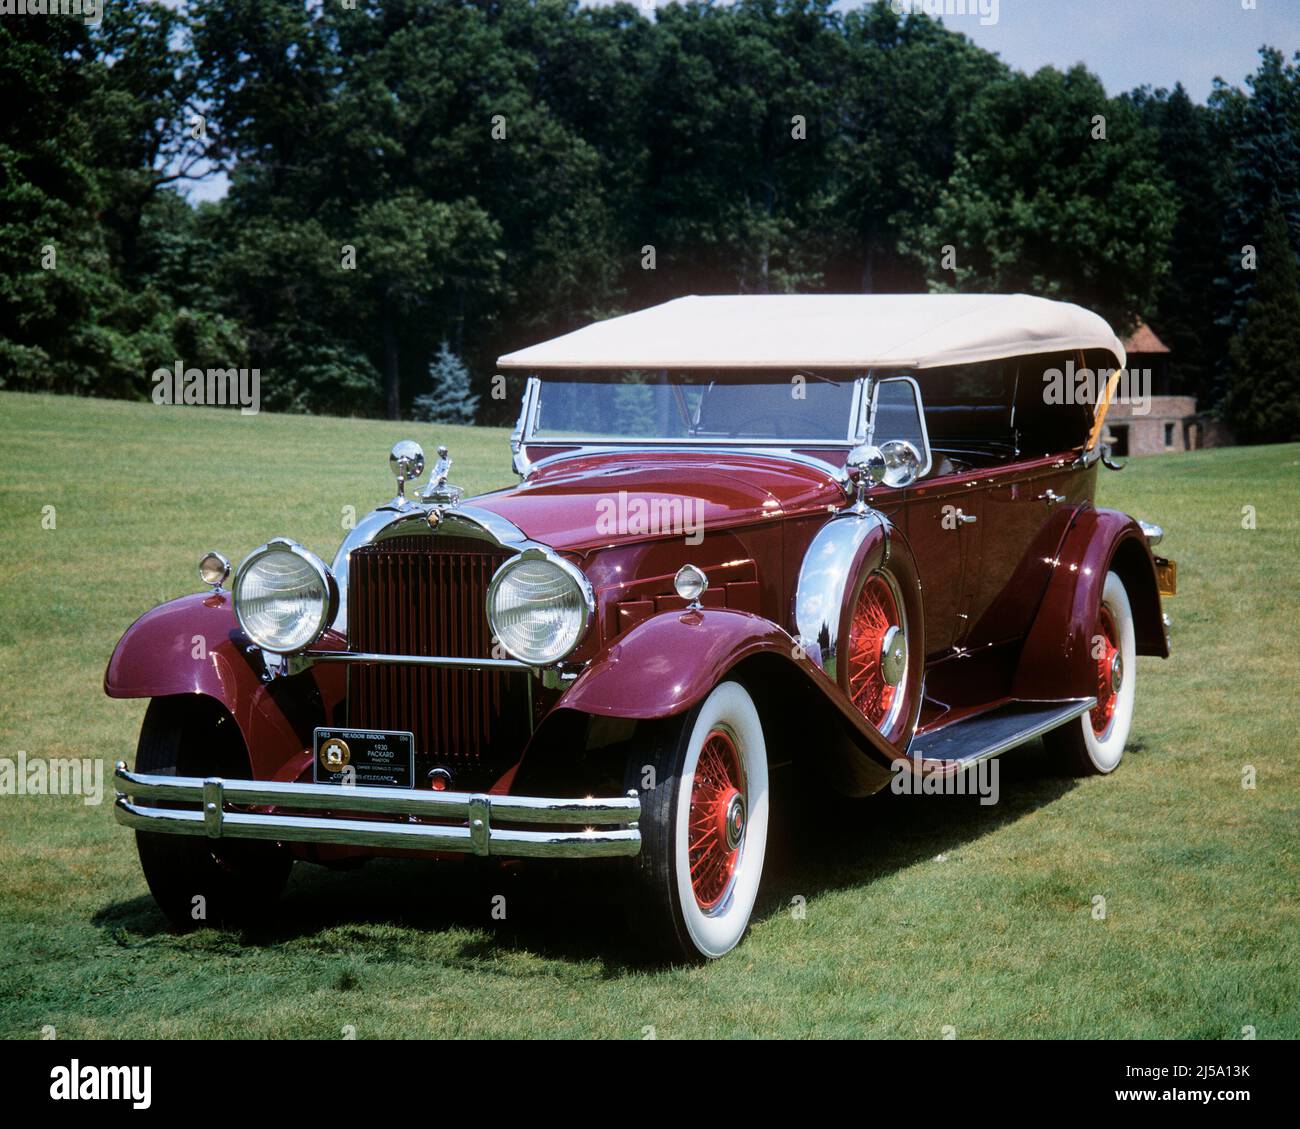 1980s 1930 PACKARD CANVAS CONVERTIBLE TOP TOURING CAR MAROON PAINT WHITEWALL TIRES  - km7977 RSS001 HARS STYLISH VEHICLES EXTRAVAGANCE GOOD CONDITION OPULENT LAVISH MAINTAINED PACKARD RESTORED SPARE STATUS SYMBOL TIRES WHITE SIDEWALL MAROON OLD FASHIONED TOURING Stock Photo